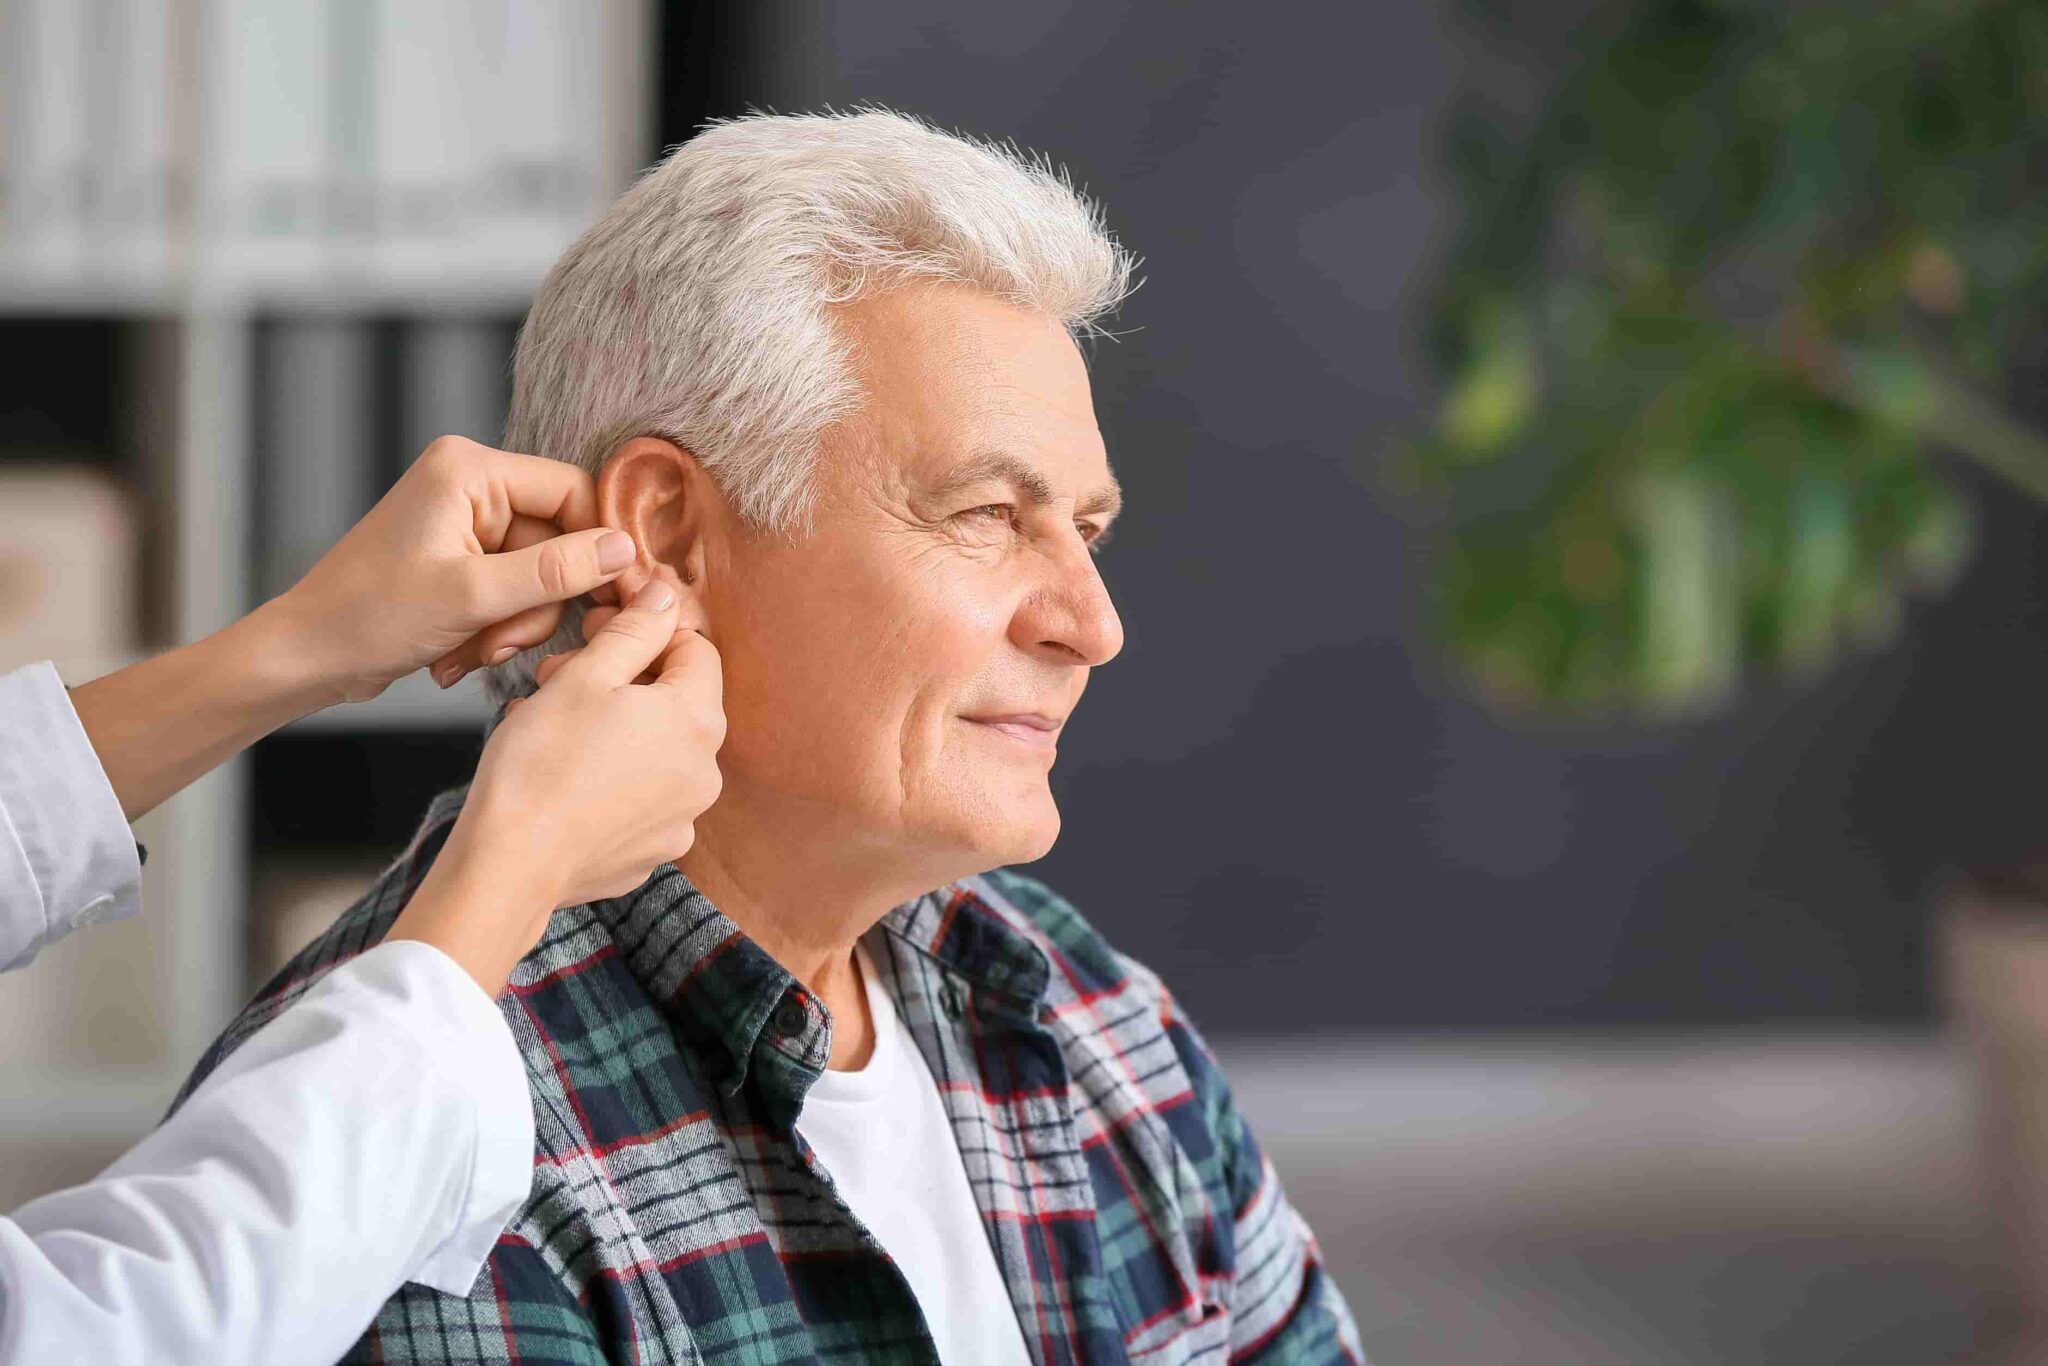 How to prevent your hearing aids from falling off your ears